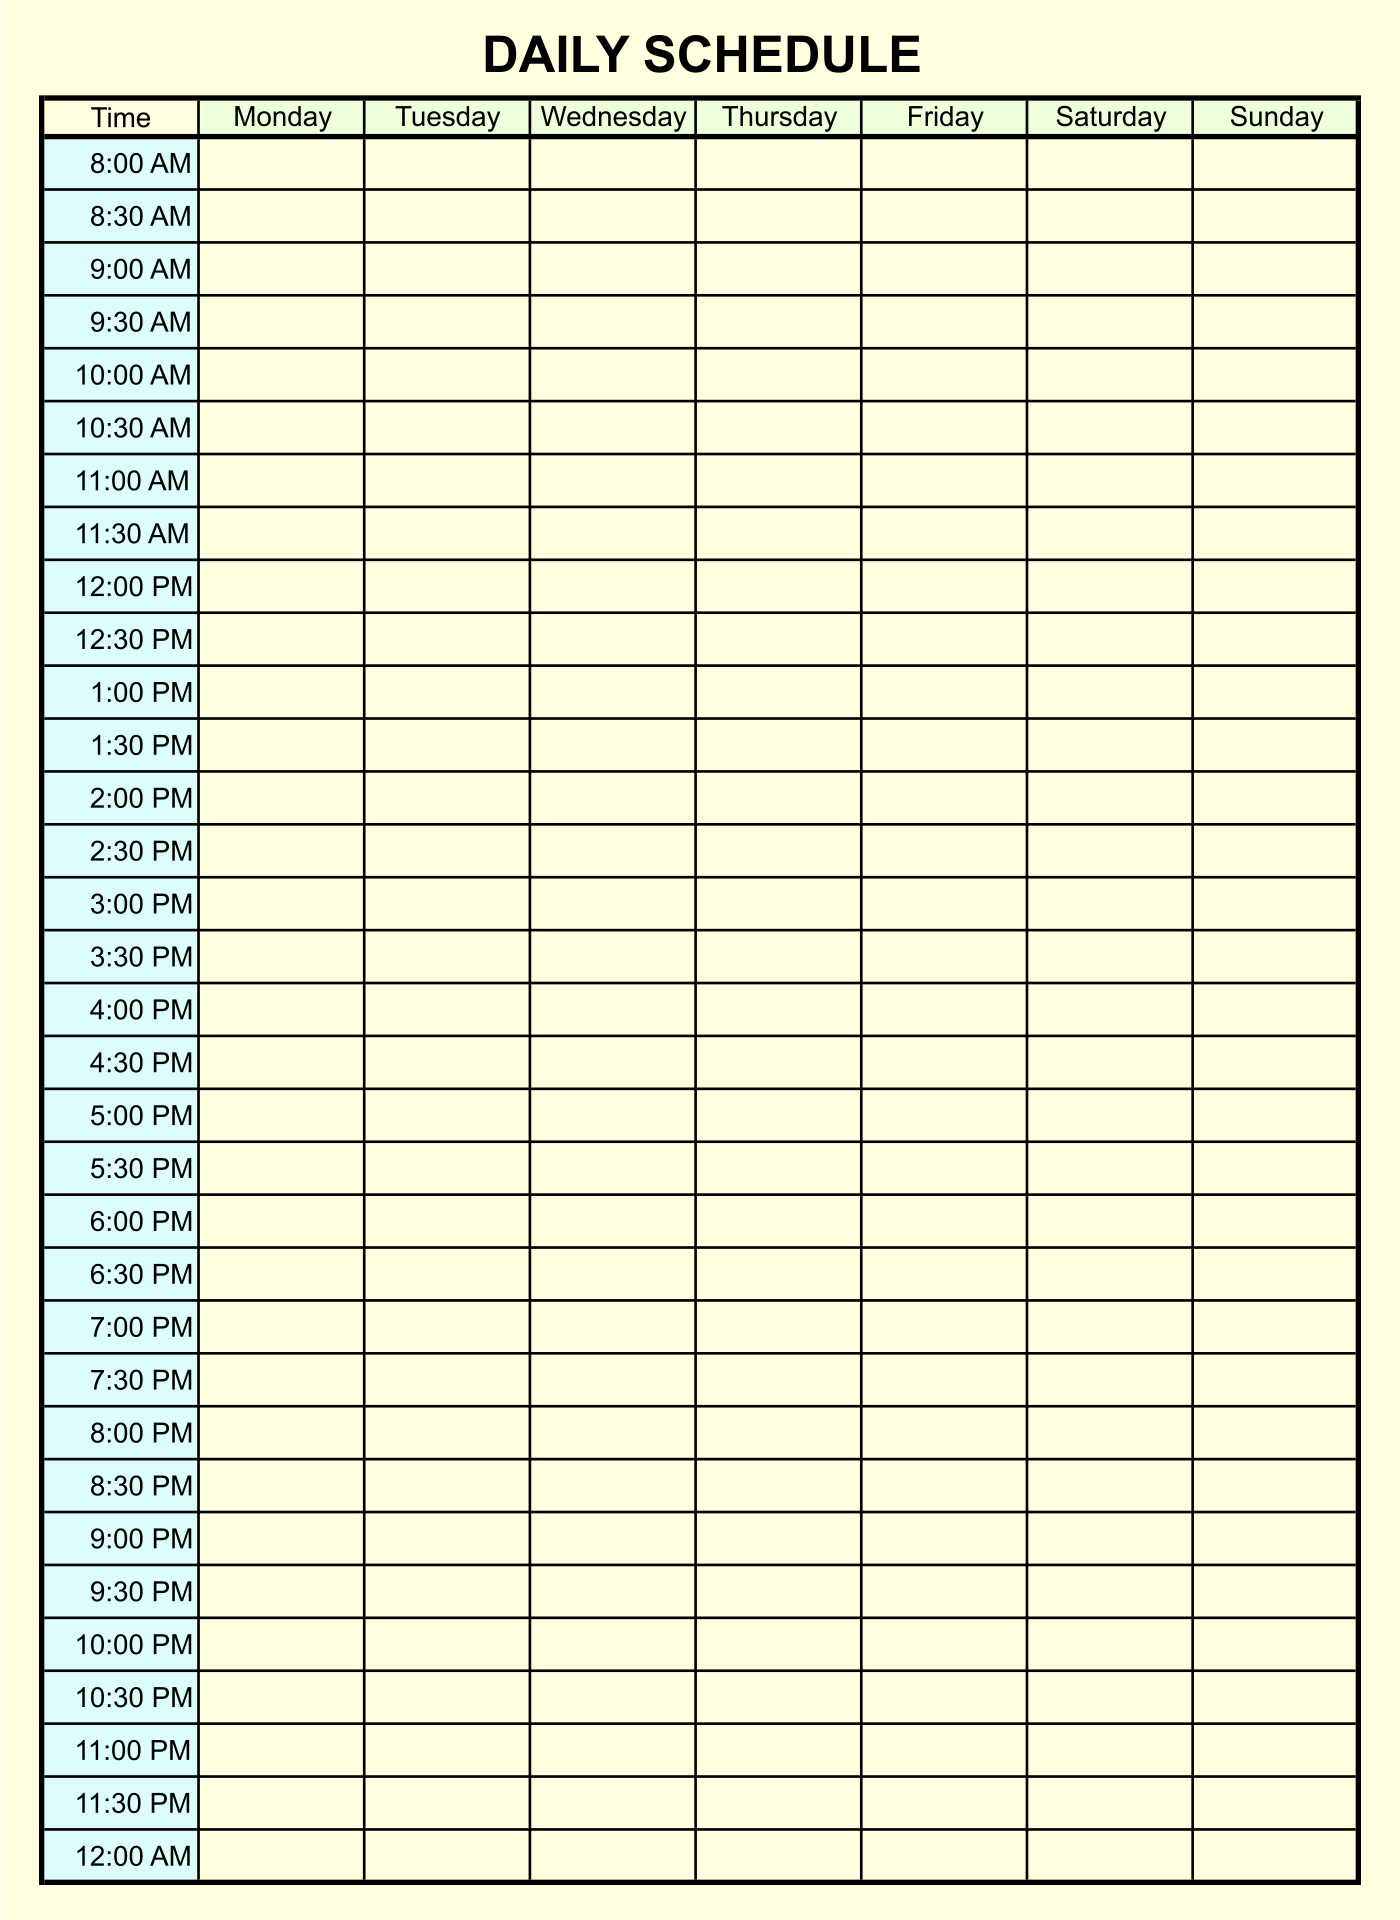 24 Hour Daily Schedule Printable All in one Photos